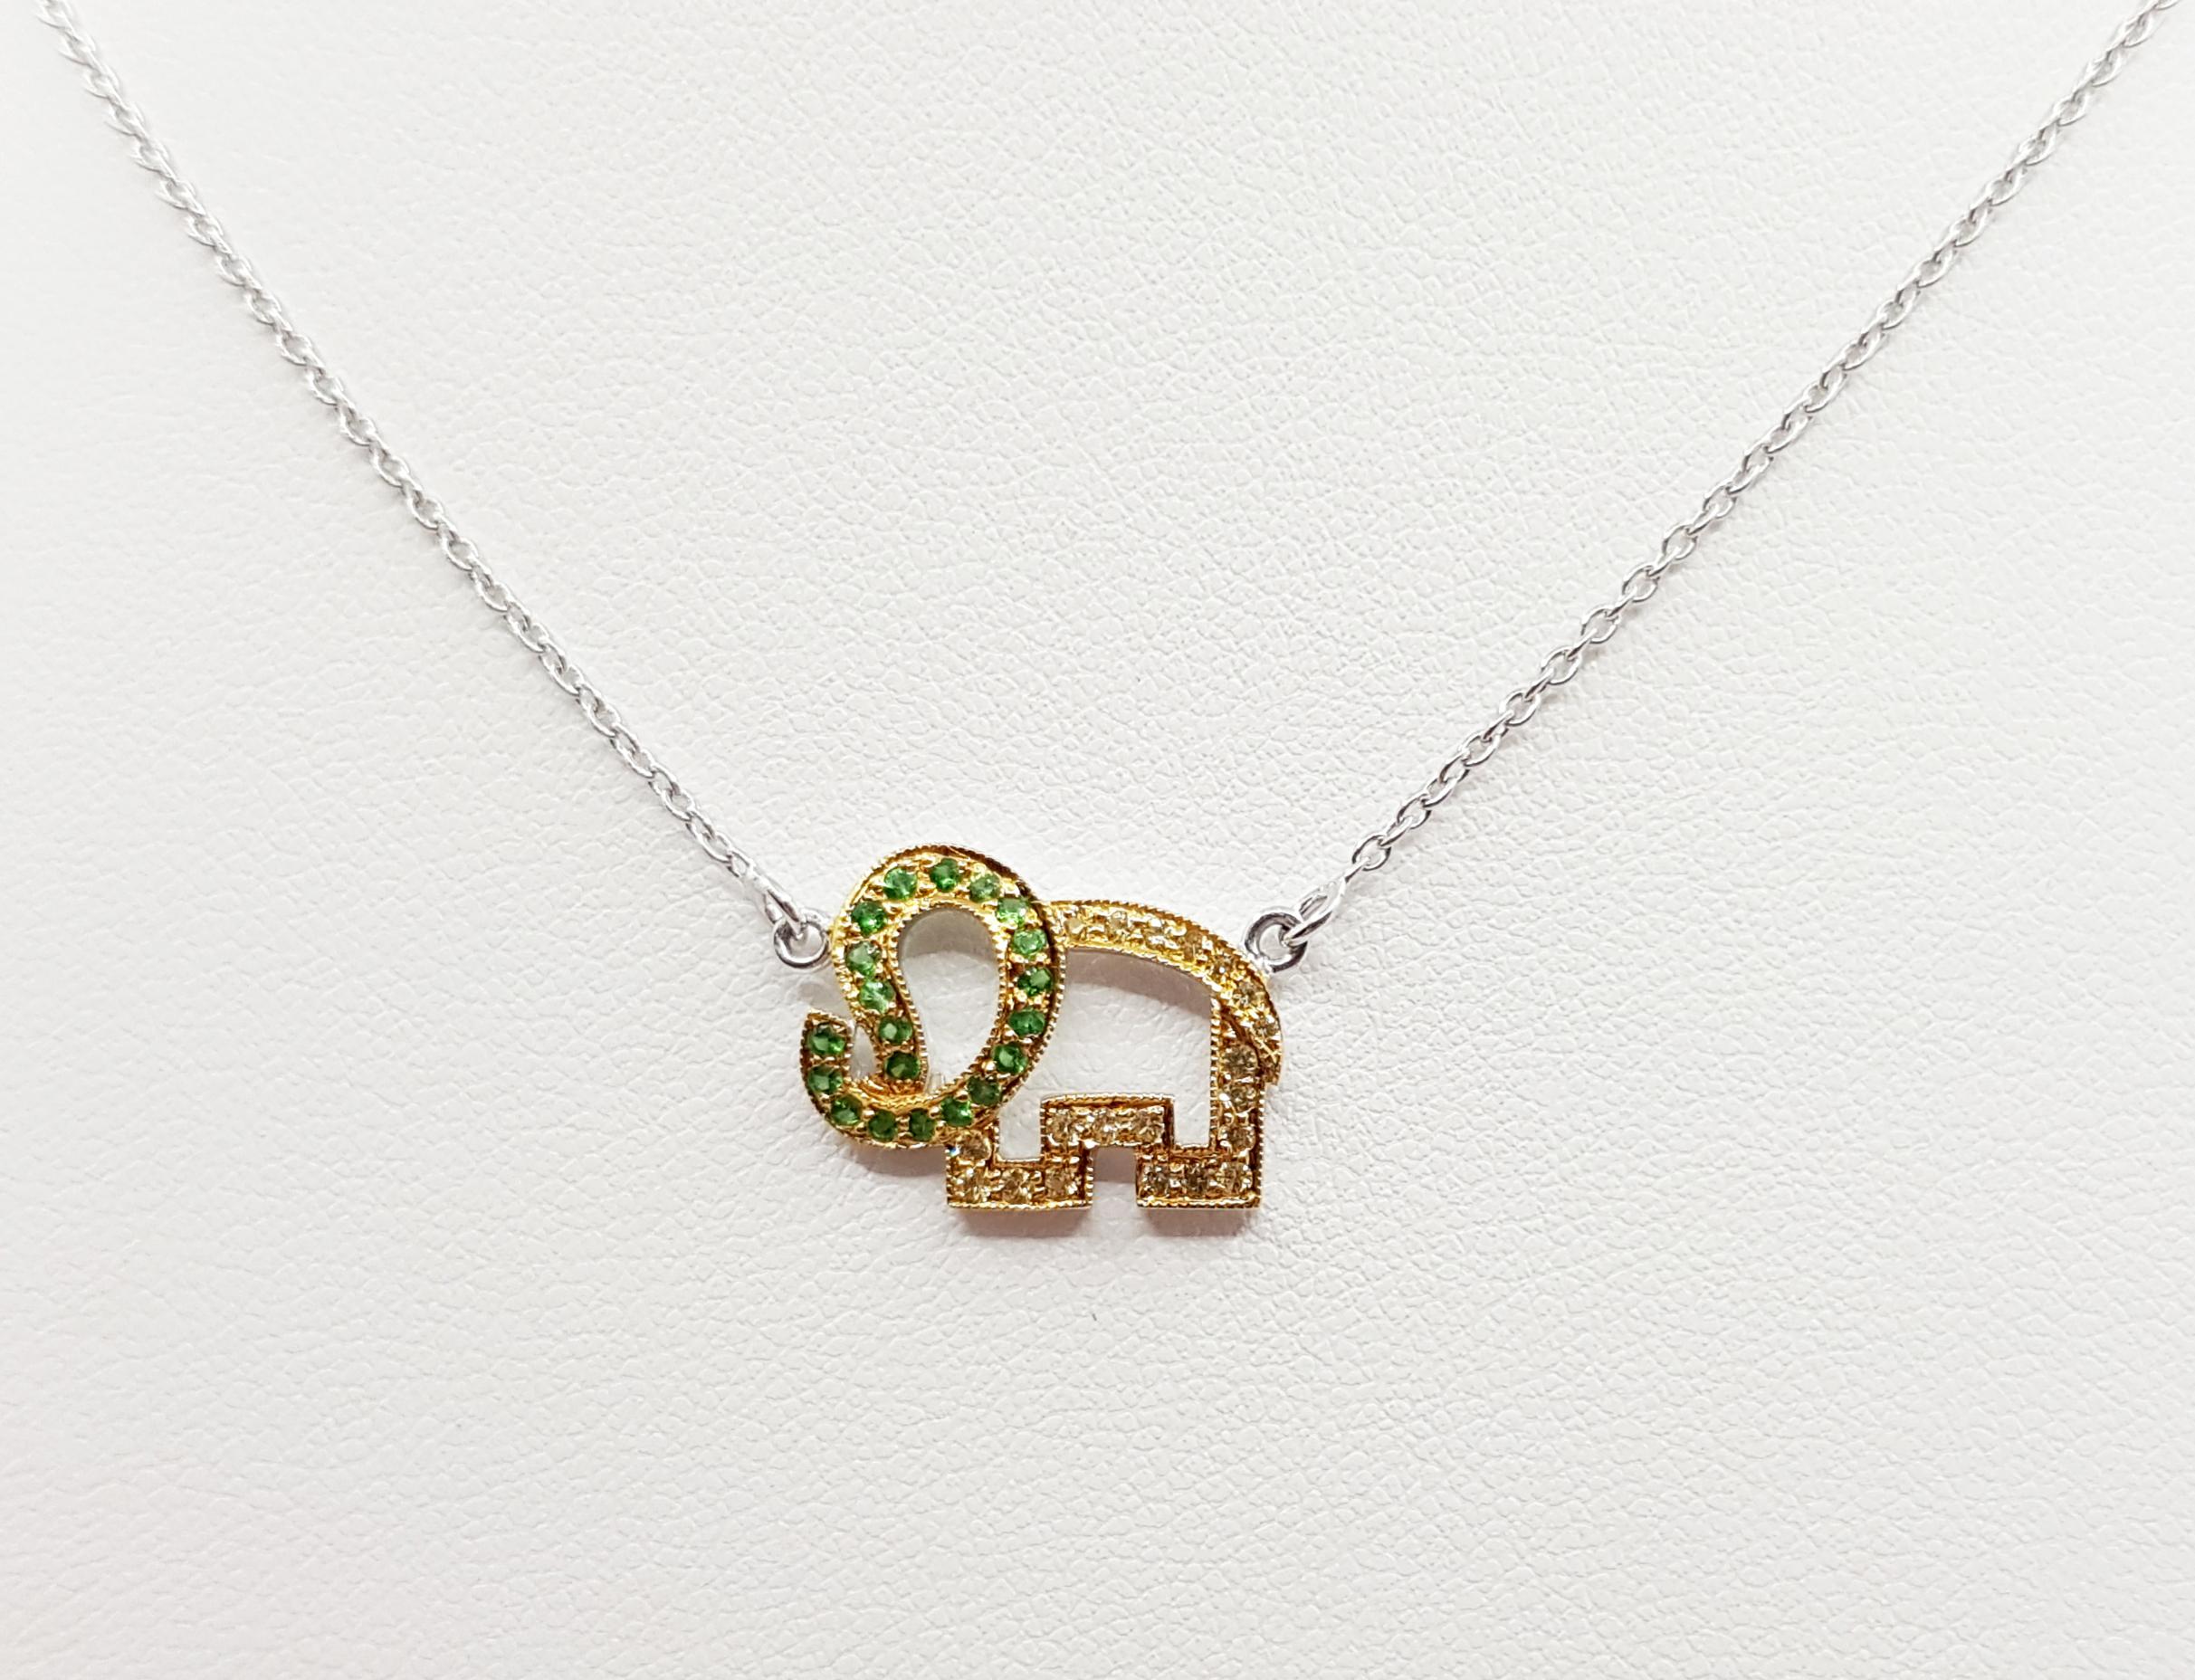 Tsavorite and Yellow Sapphire Necklace set in Silver Settings

Width:  1.3 cm 
Length:  45.5 cm
Total Weight: 2.7 grams

*Please note that the silver setting is plated with gold and  rhodium to promote shine and help prevent oxidation.  However,